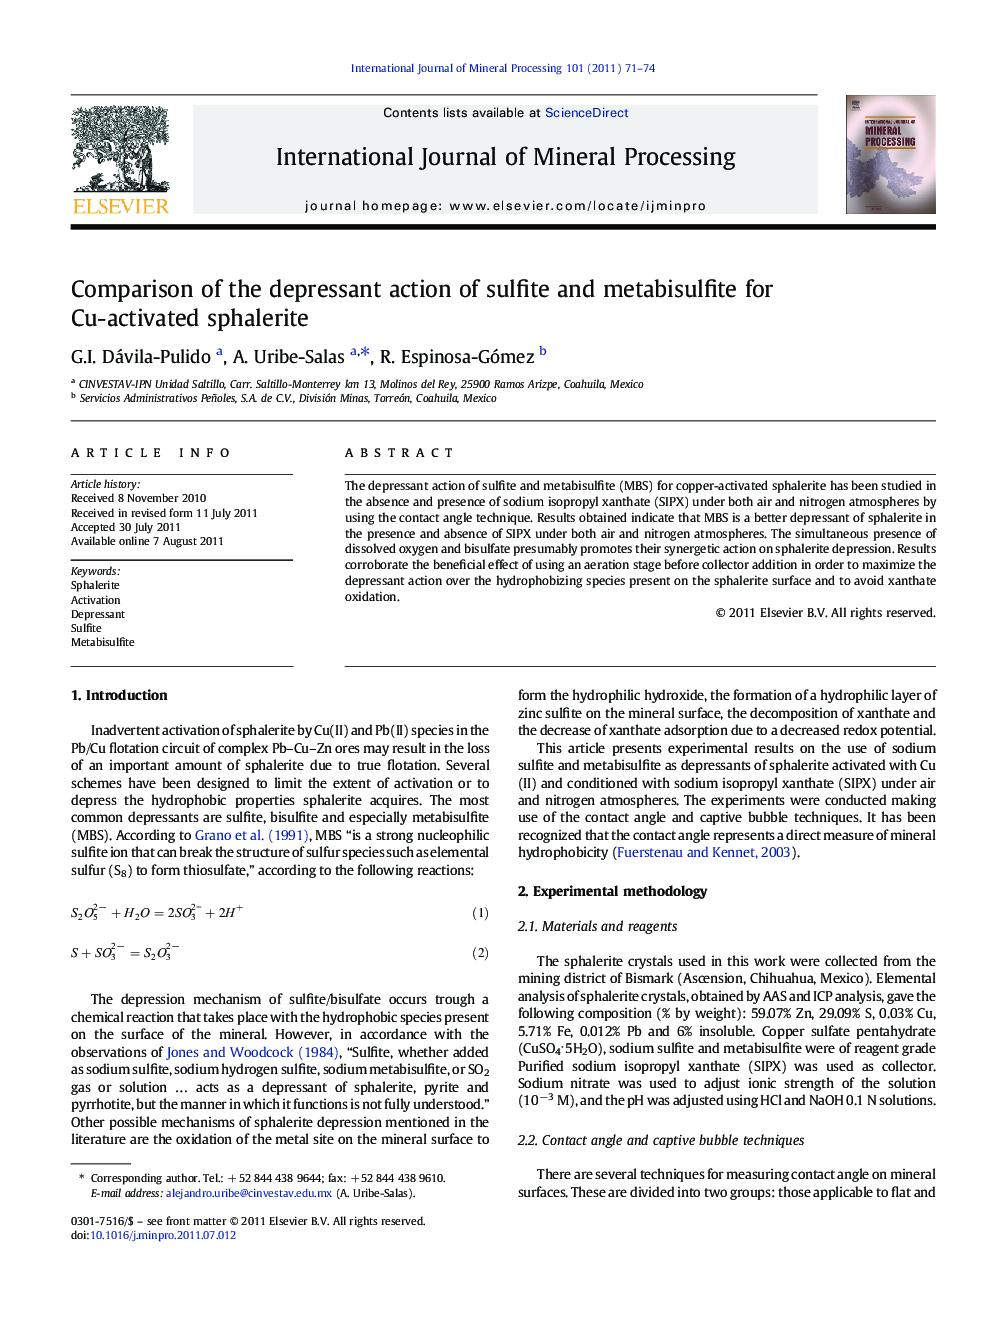 Comparison of the depressant action of sulfite and metabisulfite for Cu-activated sphalerite